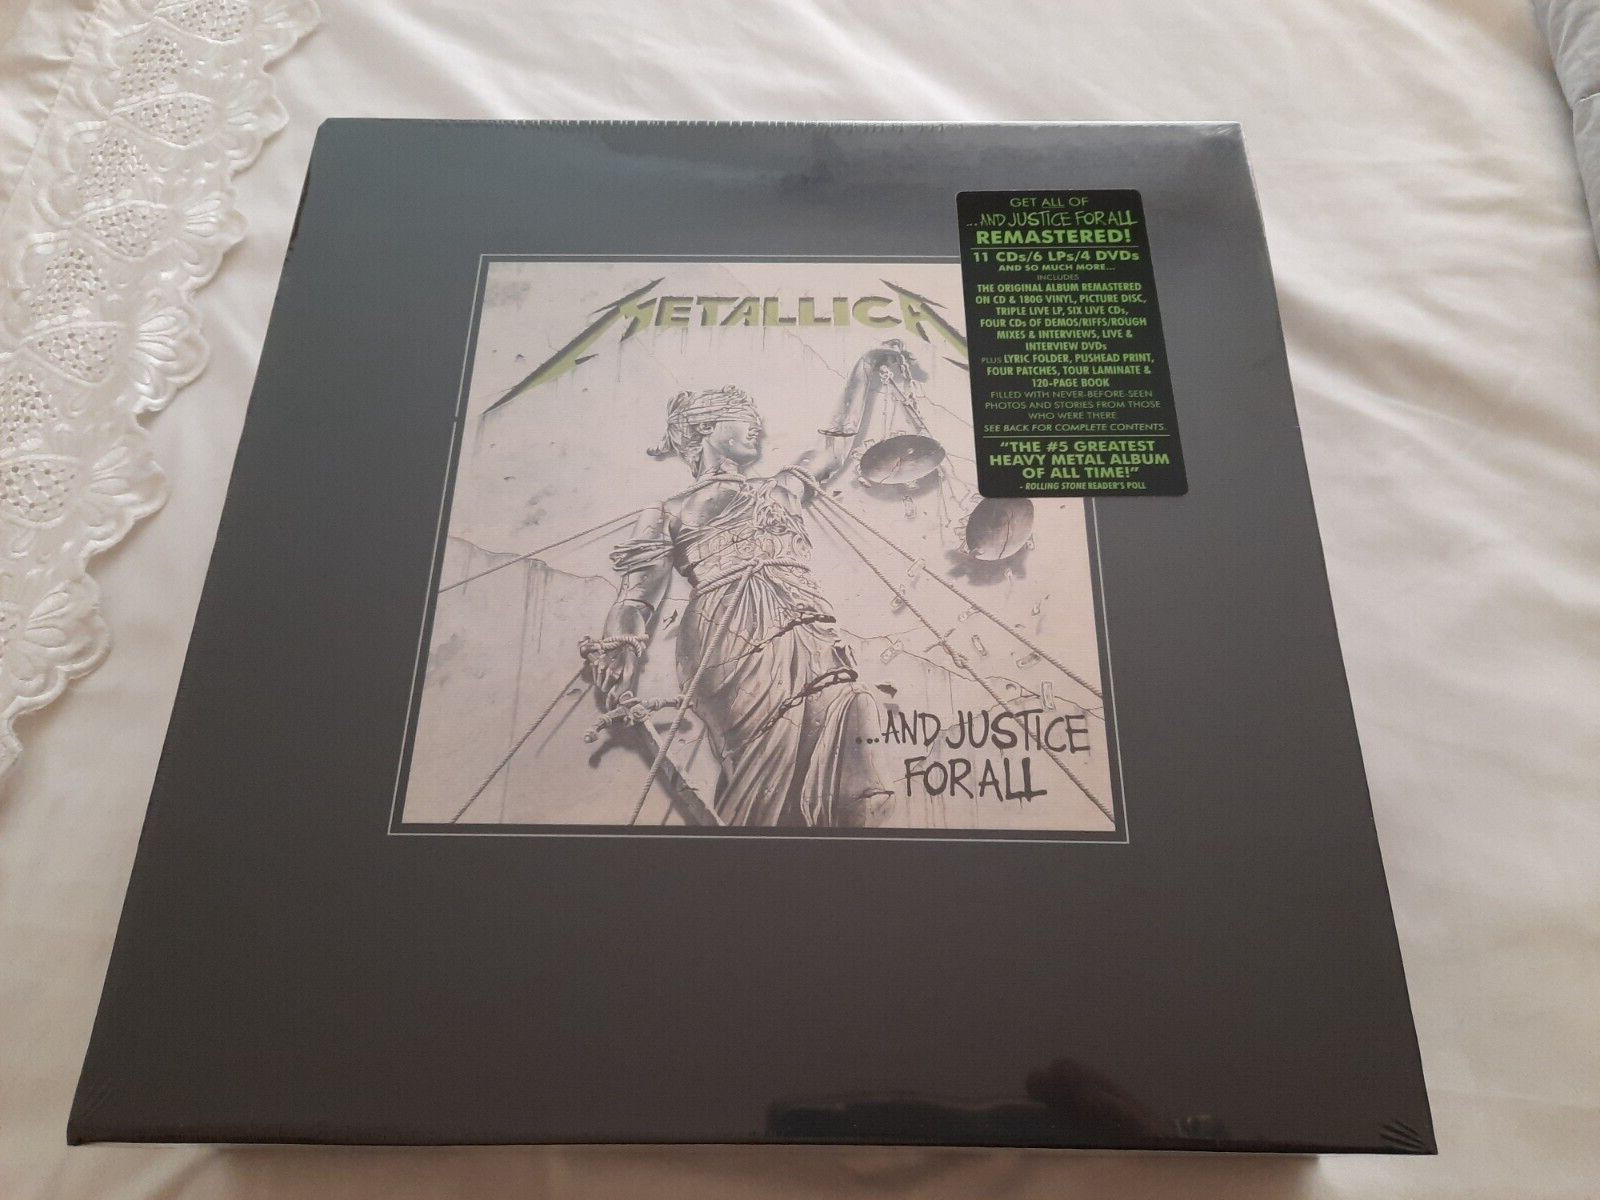 Metallica- ...And Justice For All, Remastered Box Set New in Shrink Wrap